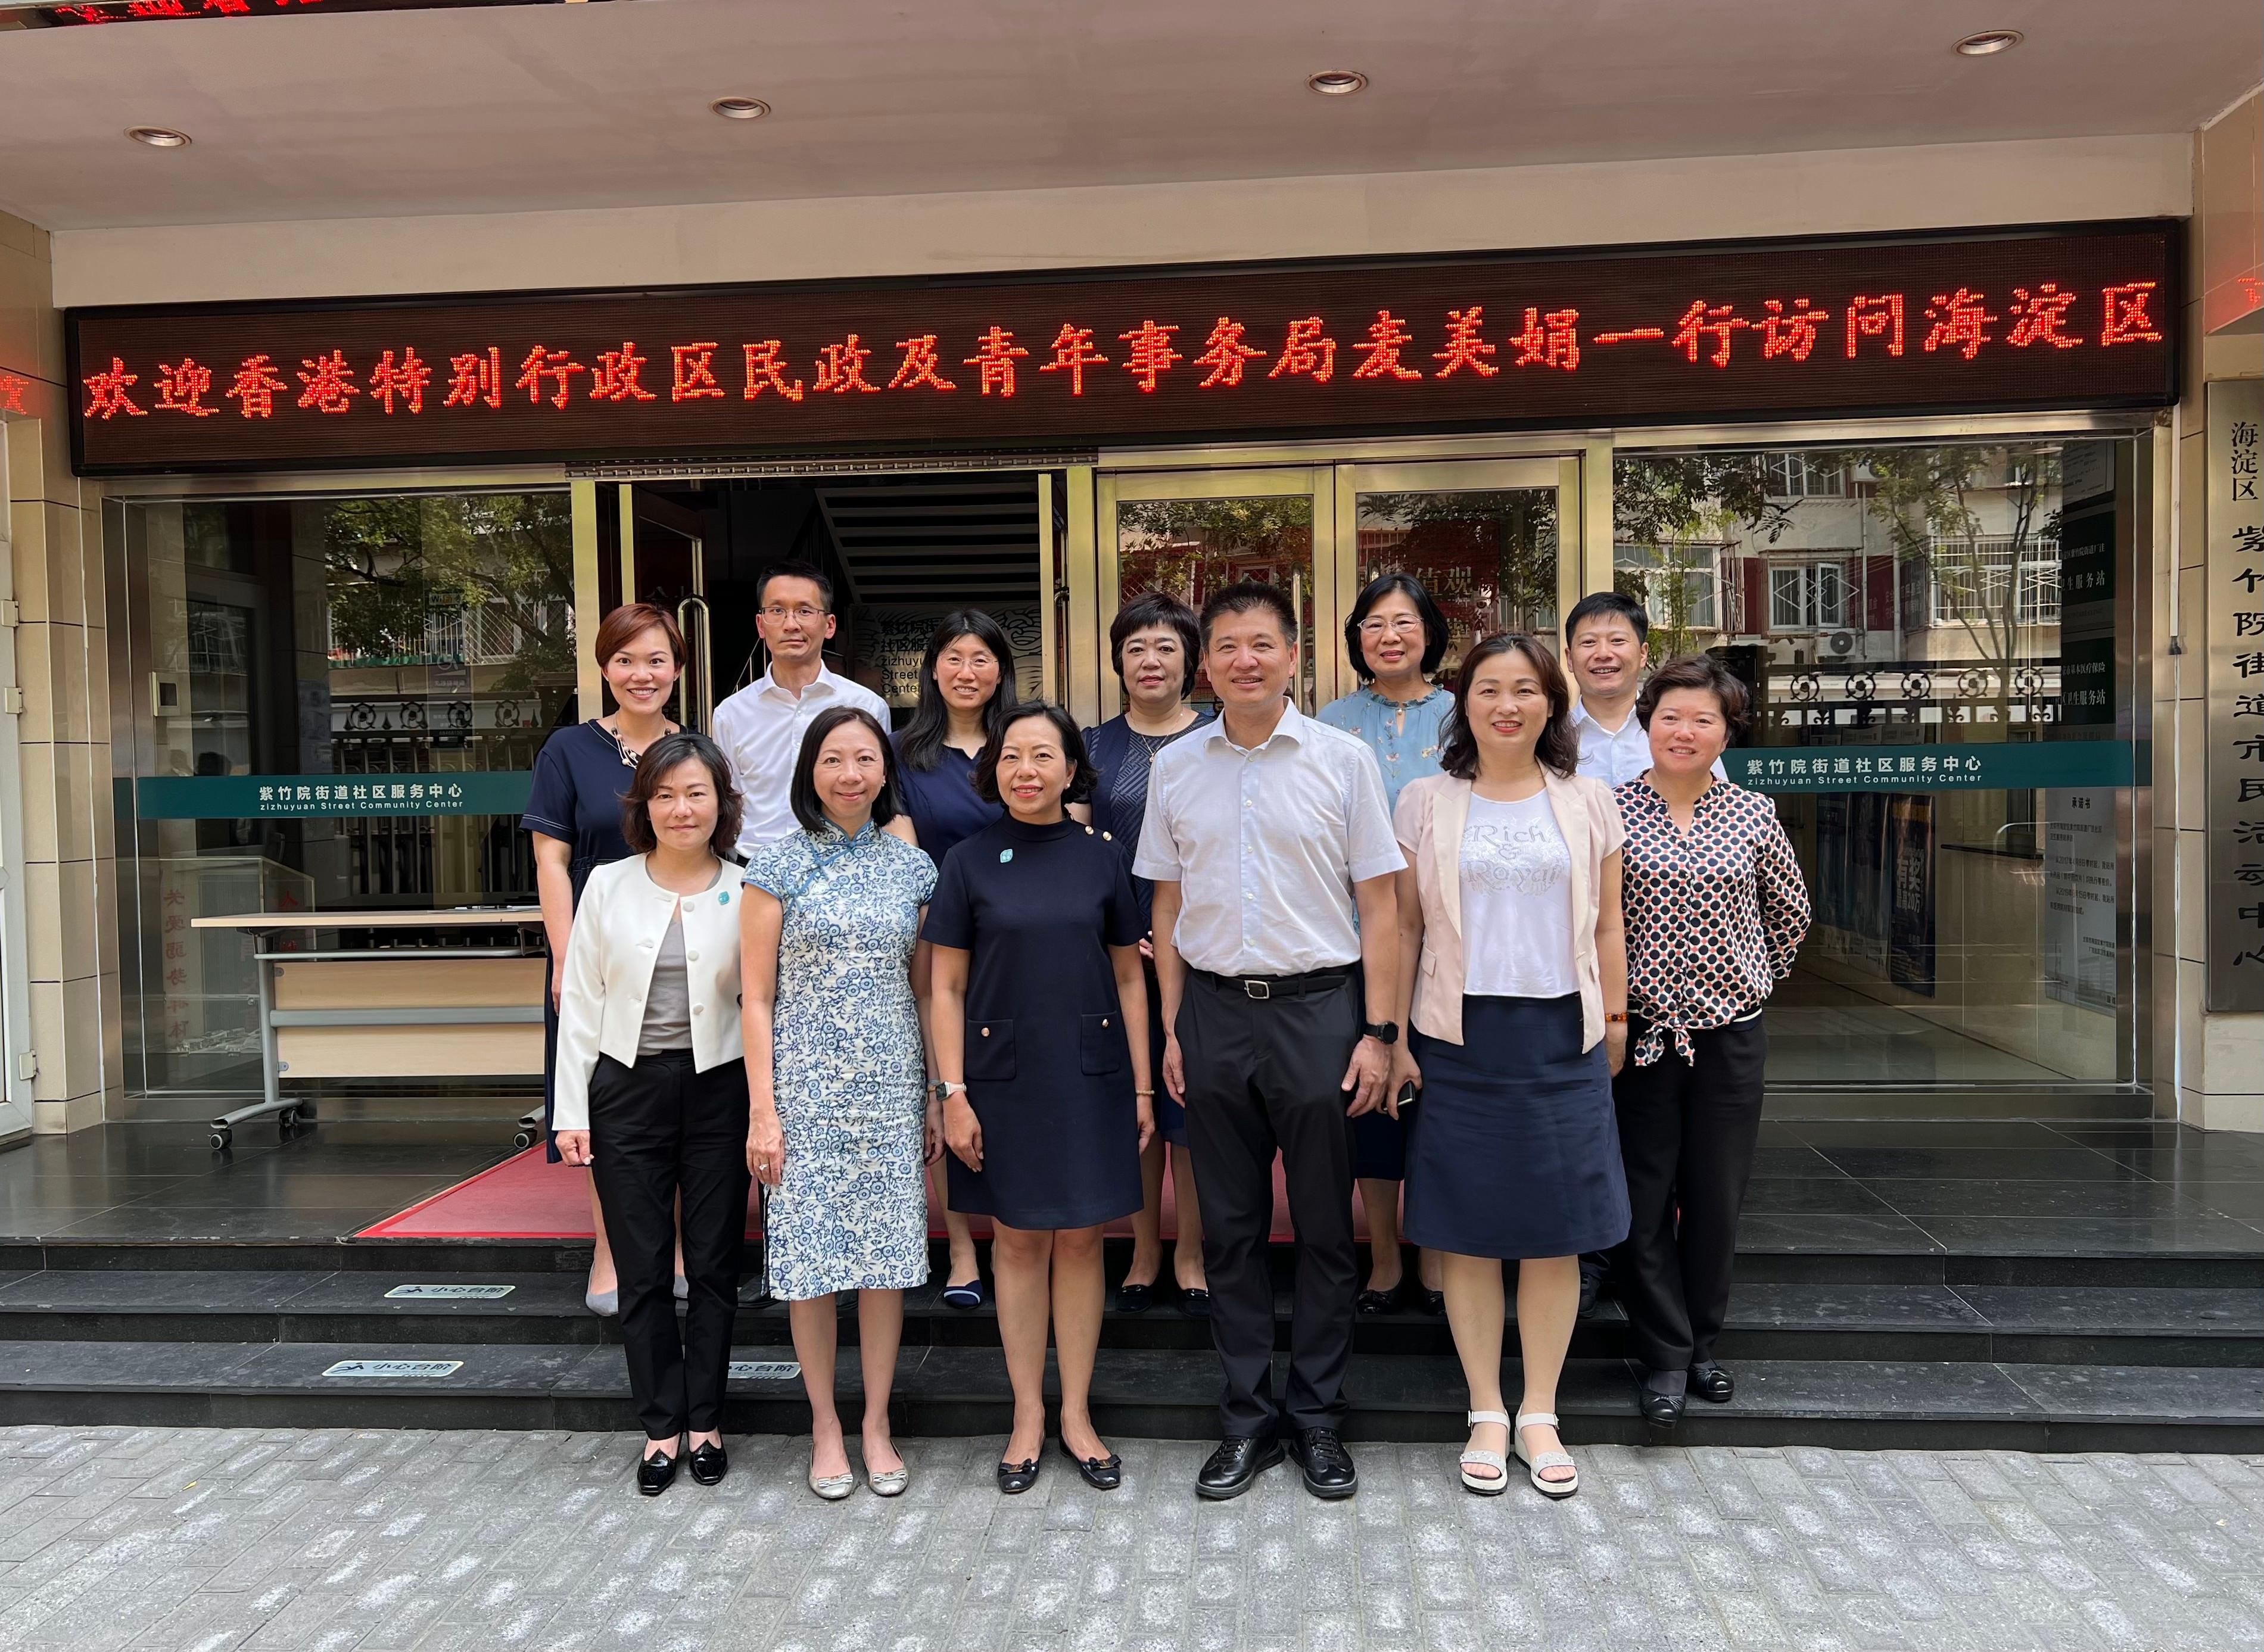 The Secretary for Home and Youth Affairs, Miss Alice Mak, continued her visit in Beijing today (July 18) and visited the Sub-district Office of Haidian District. Photo shows Miss Mak (front row, third left); the Permanent Secretary for Home and Youth Affairs, Ms Shirley Lam (front row, second left); the Director of Home Affairs, Mrs Alice Cheung (front row, first left), with the officers of the Sub-district Office.
